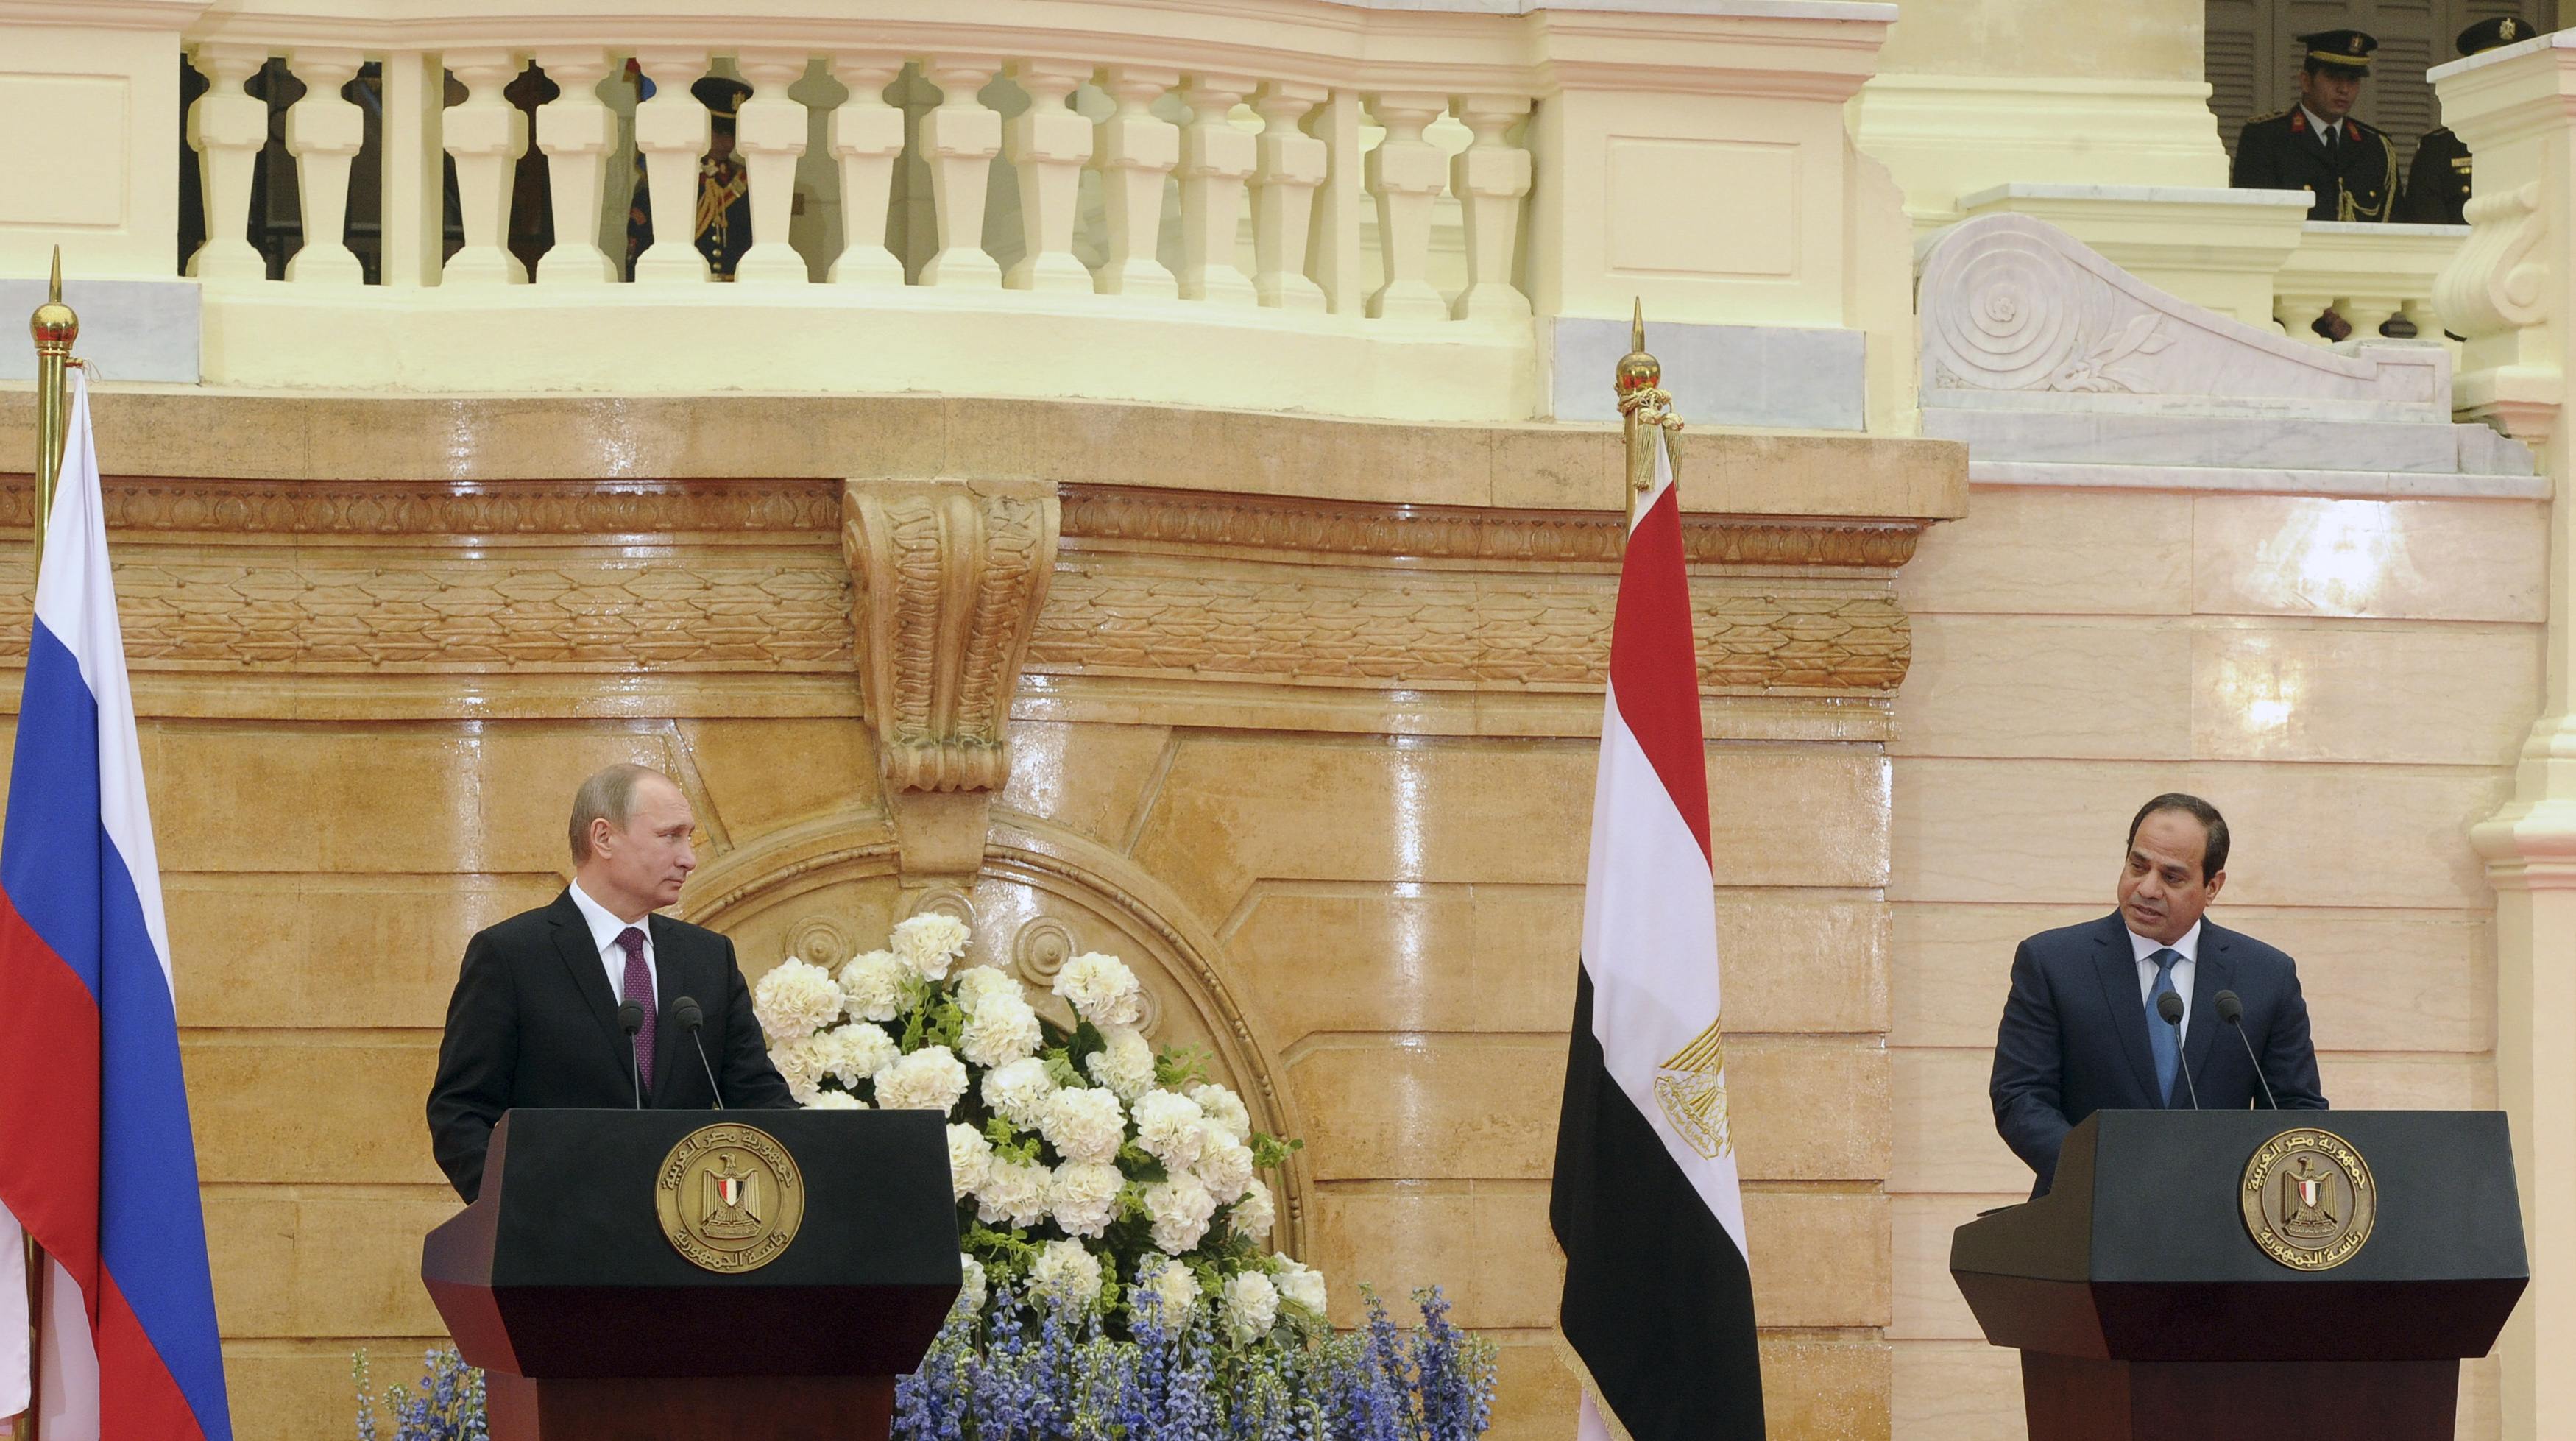 Russia's Putin, Egypt's Sisi say committed to fighting terrorism